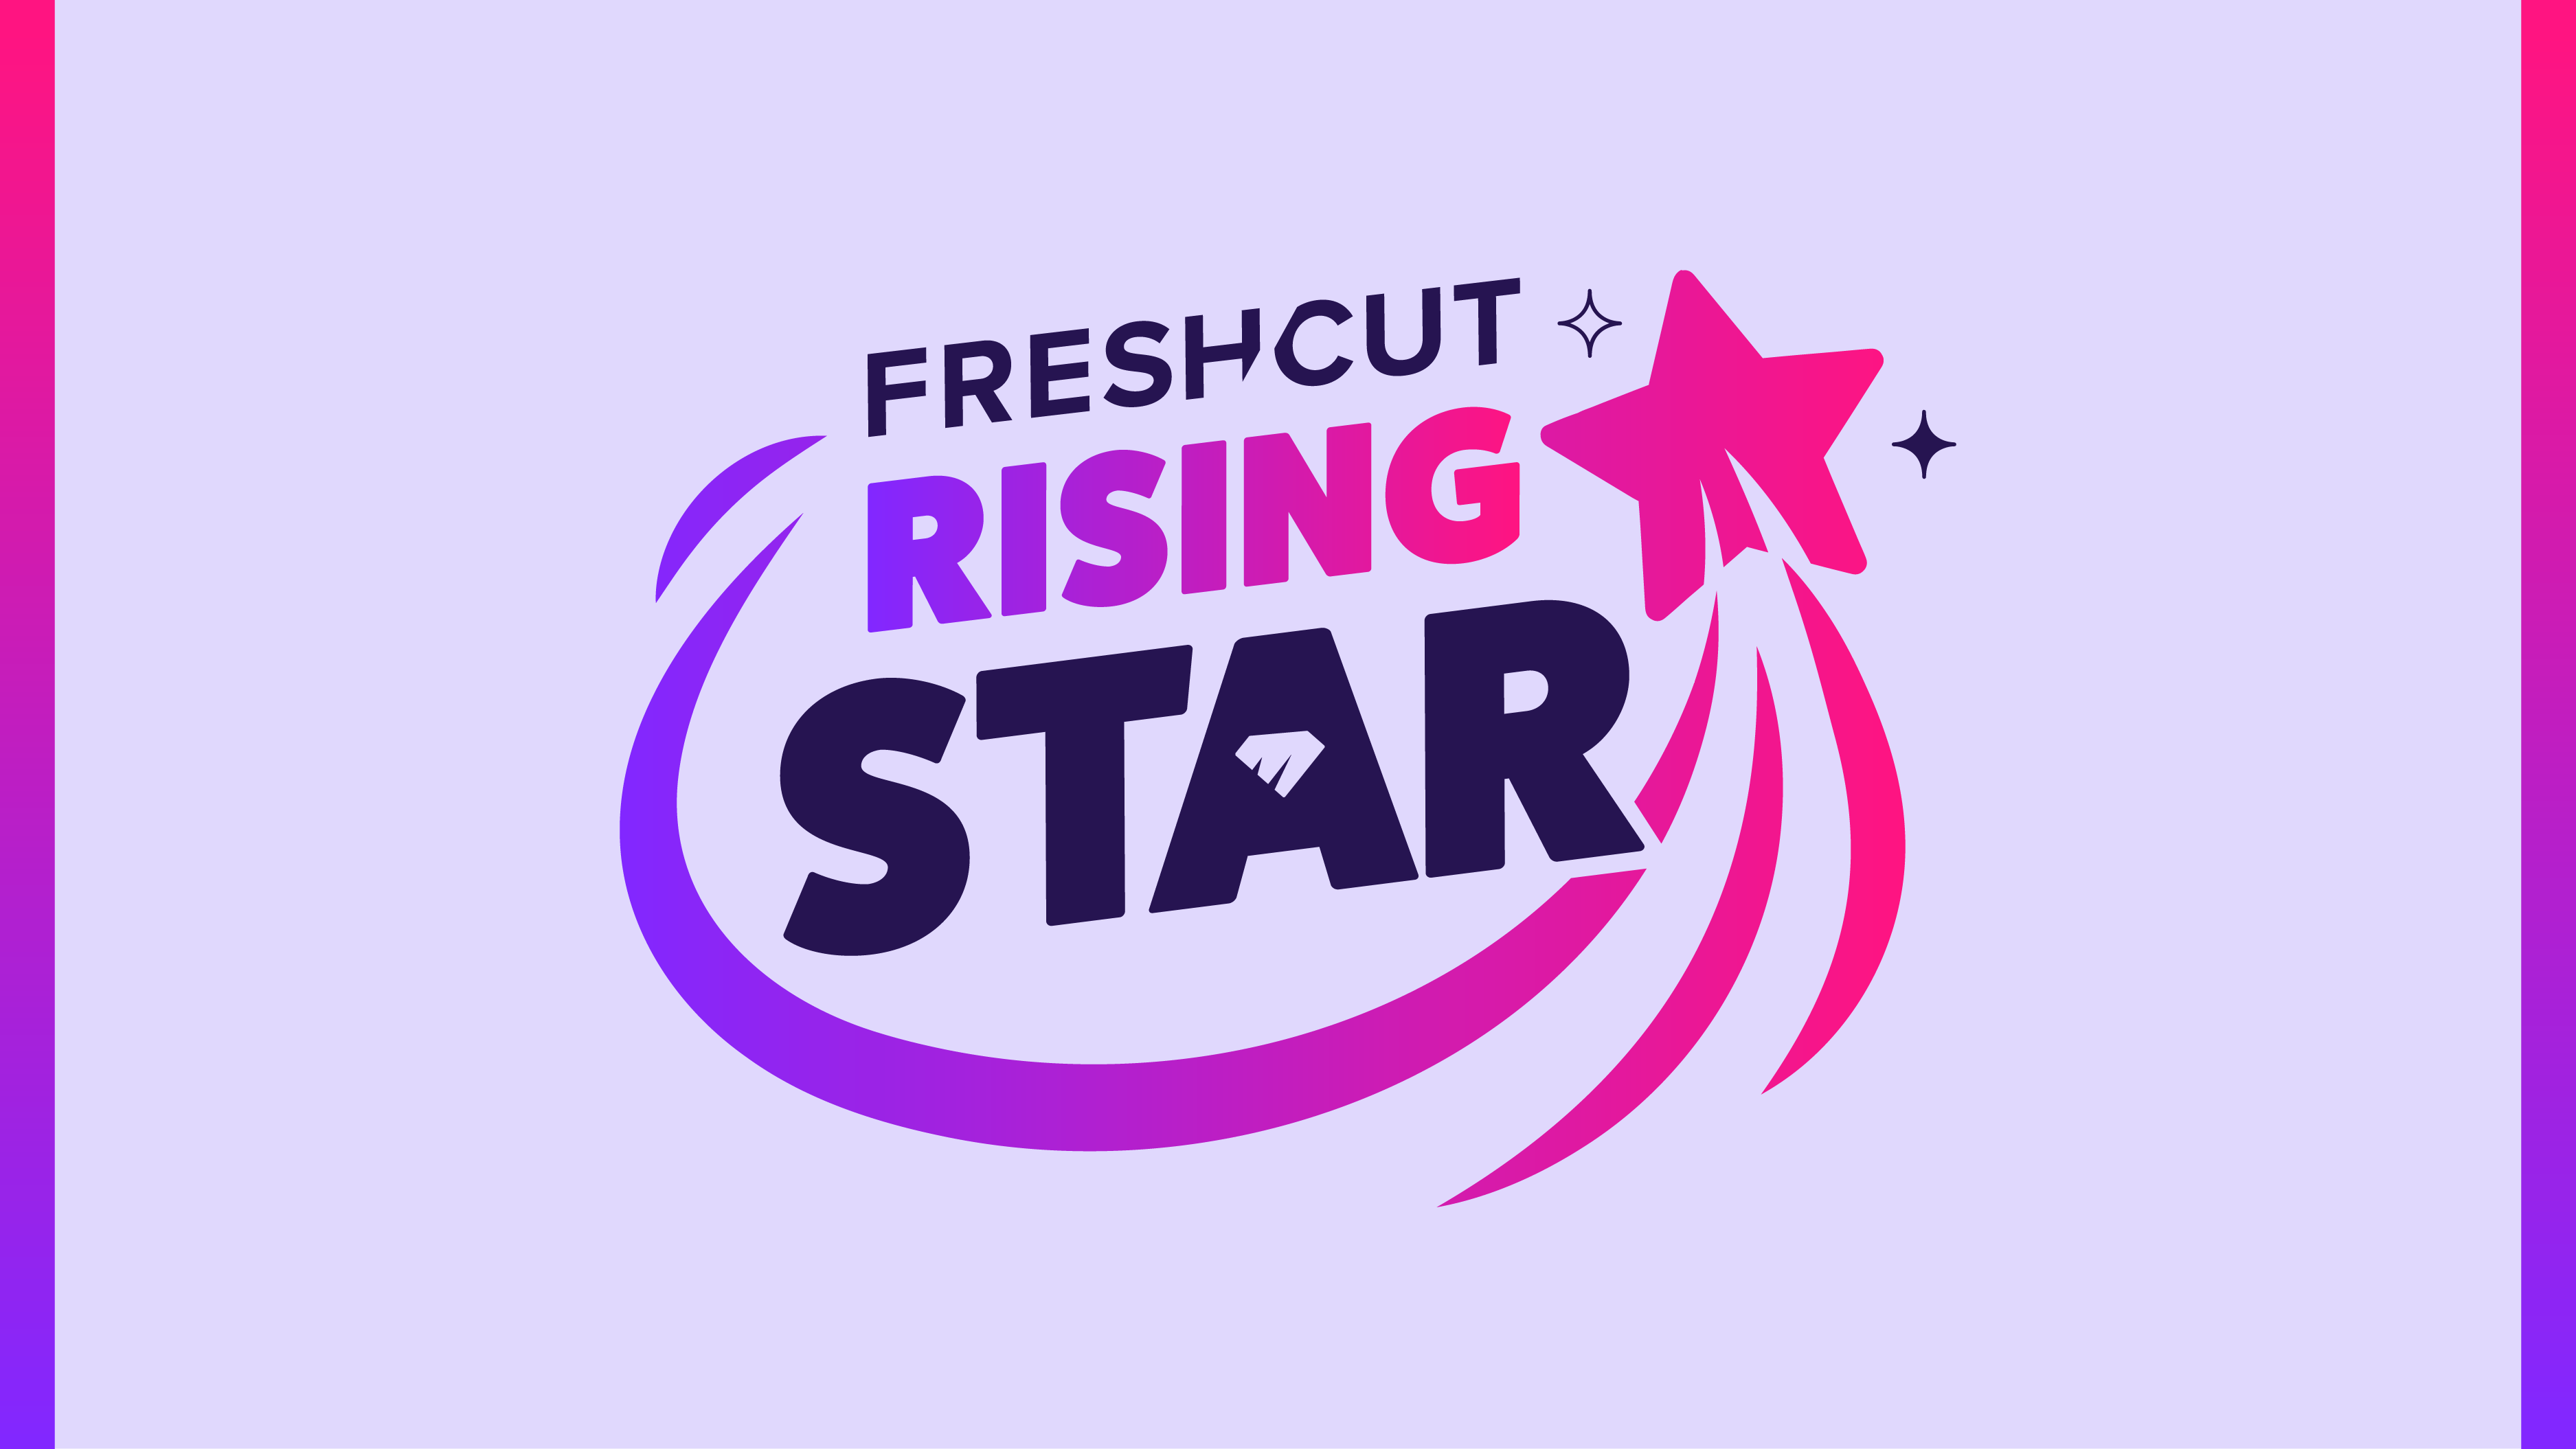 Introducing FreshCut Rising Star, our $10k+ Creator Competition